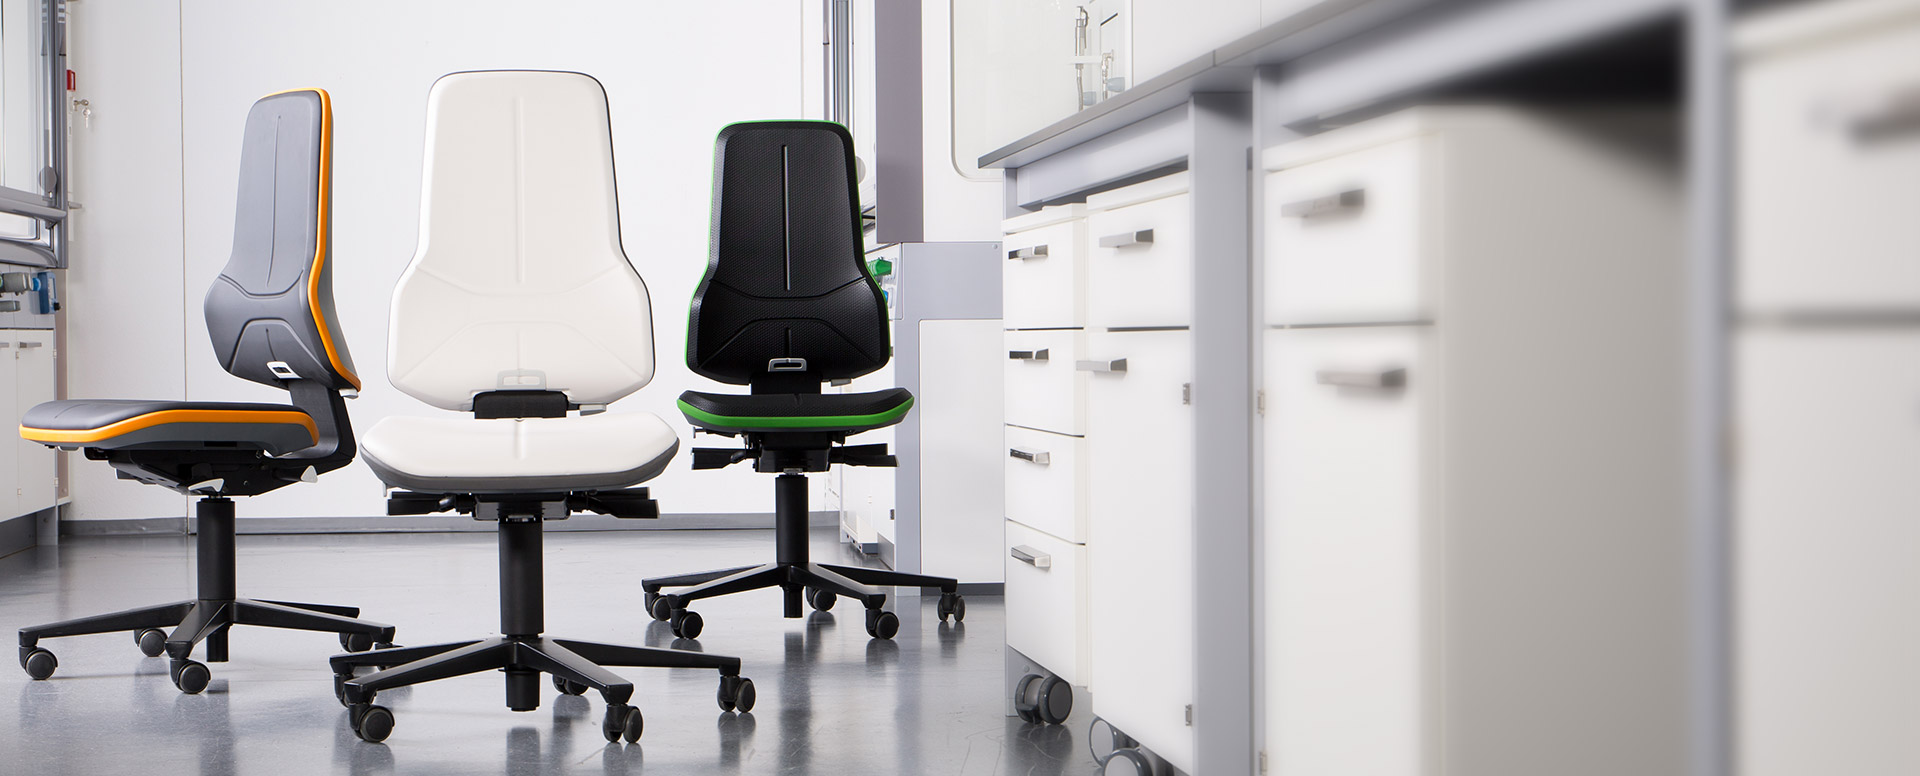 bimos NEW GENERATION WORKPLACE CHAIRS